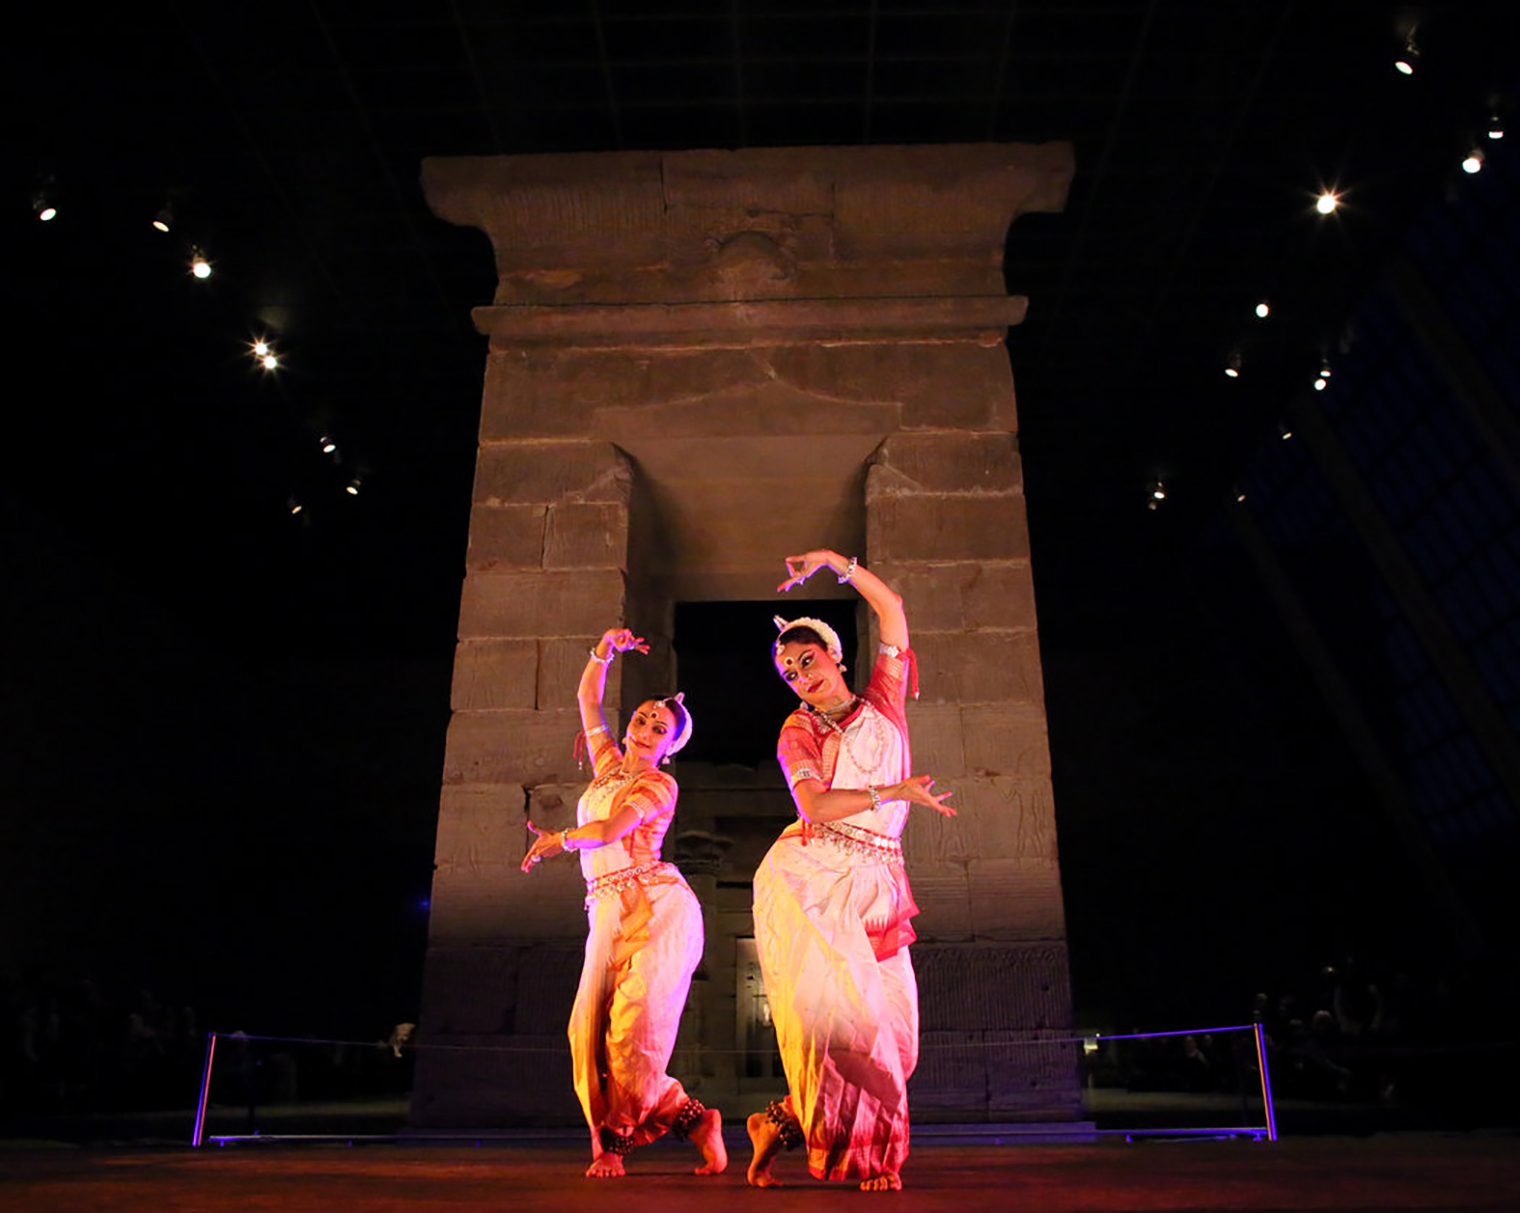 Two artists from the Nrityagram Dance Ensemble, principal dancers Surupa Sen and Bijayini Satpathy, perform in front of the temple's gateway, January 2015.